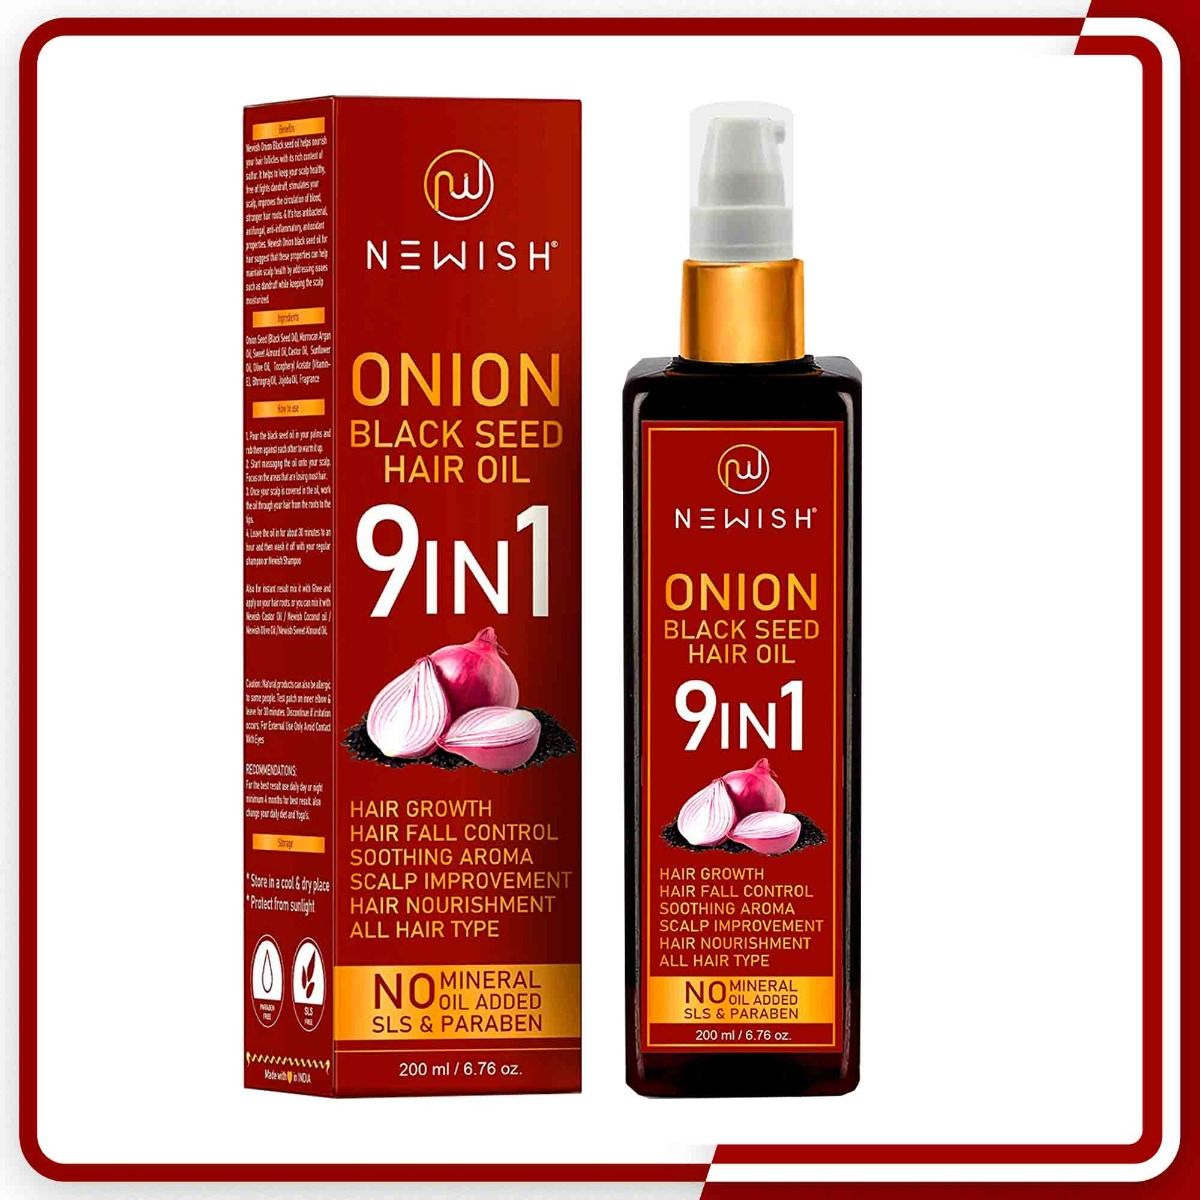 Onion hair oil | Benefits, How to Use and Make One at Home